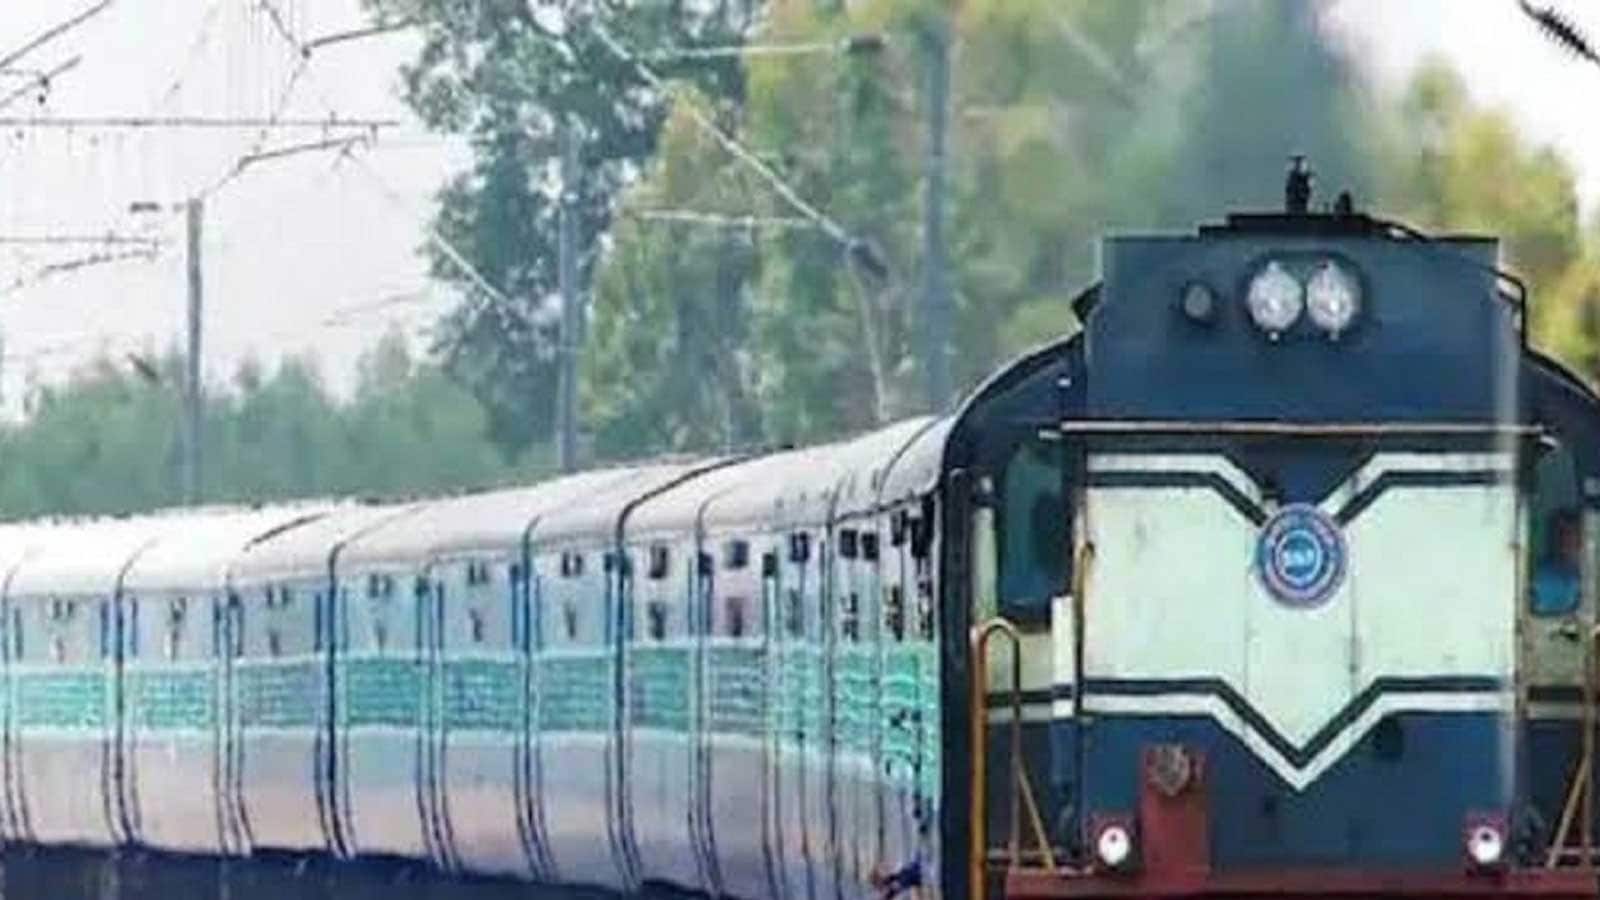 Railways’ online non-refundable facility fees more than double after pandemic: Ministry